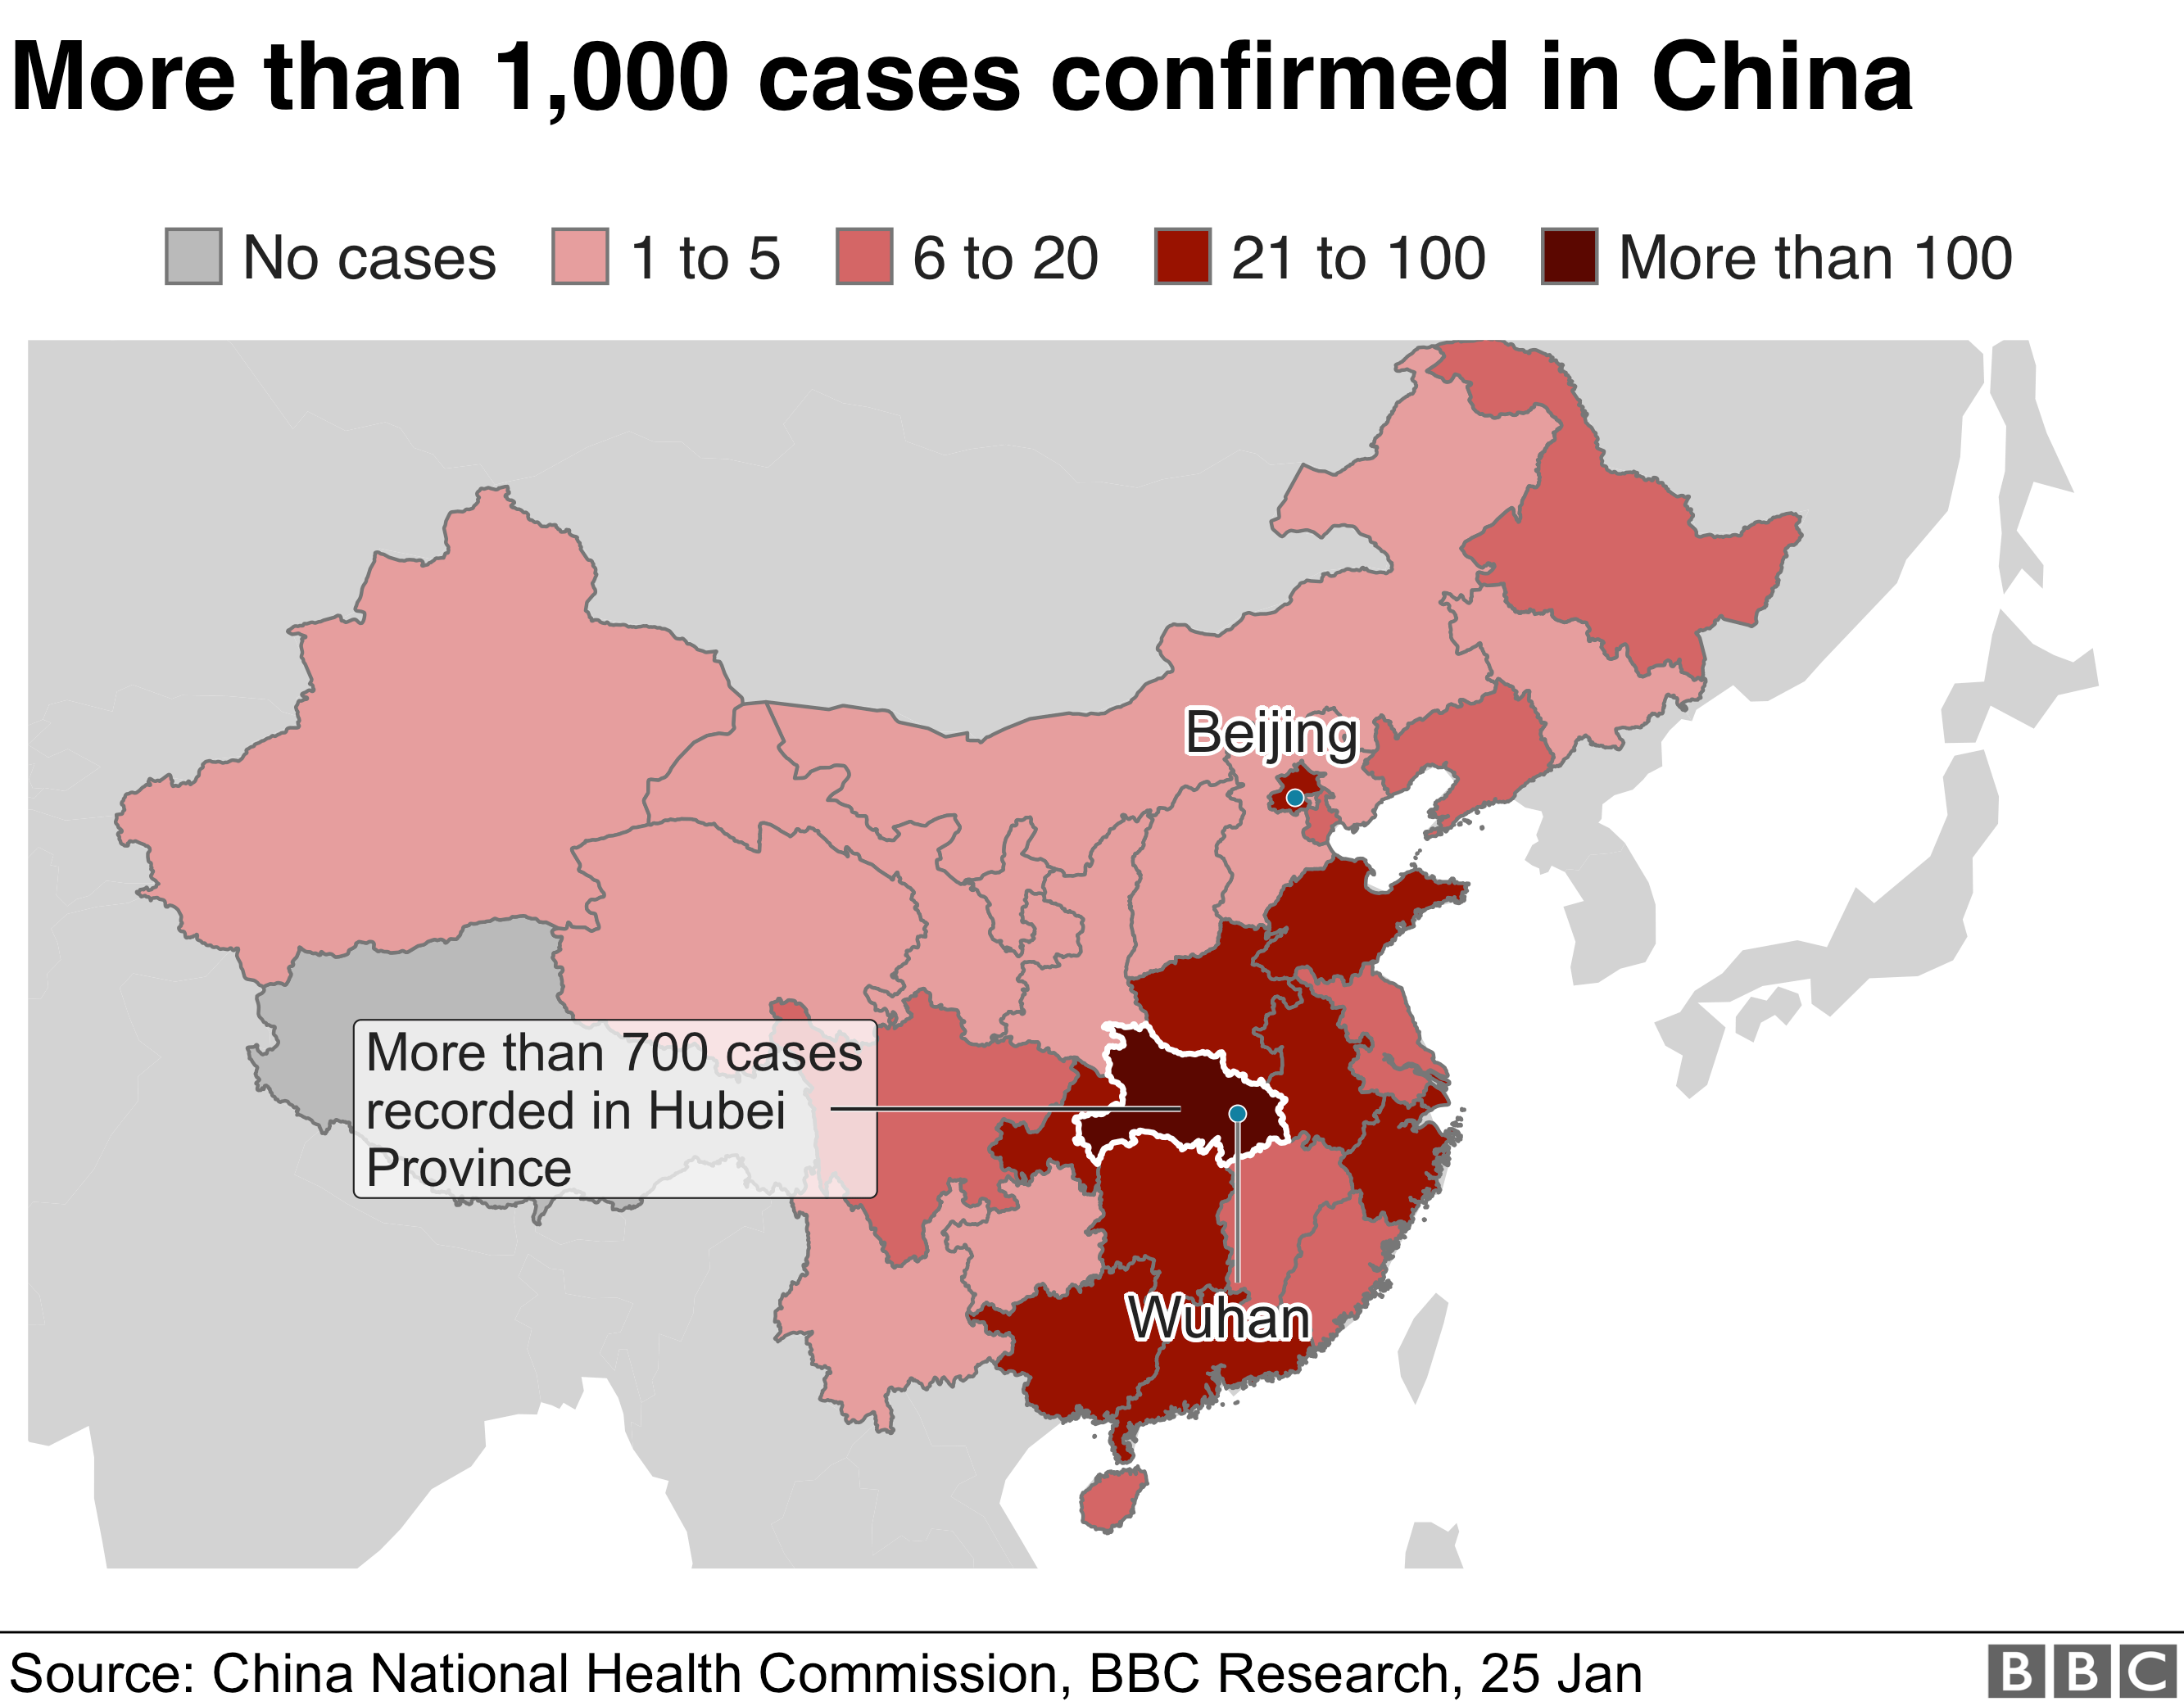 A heatmap shows the spread of the virus in China